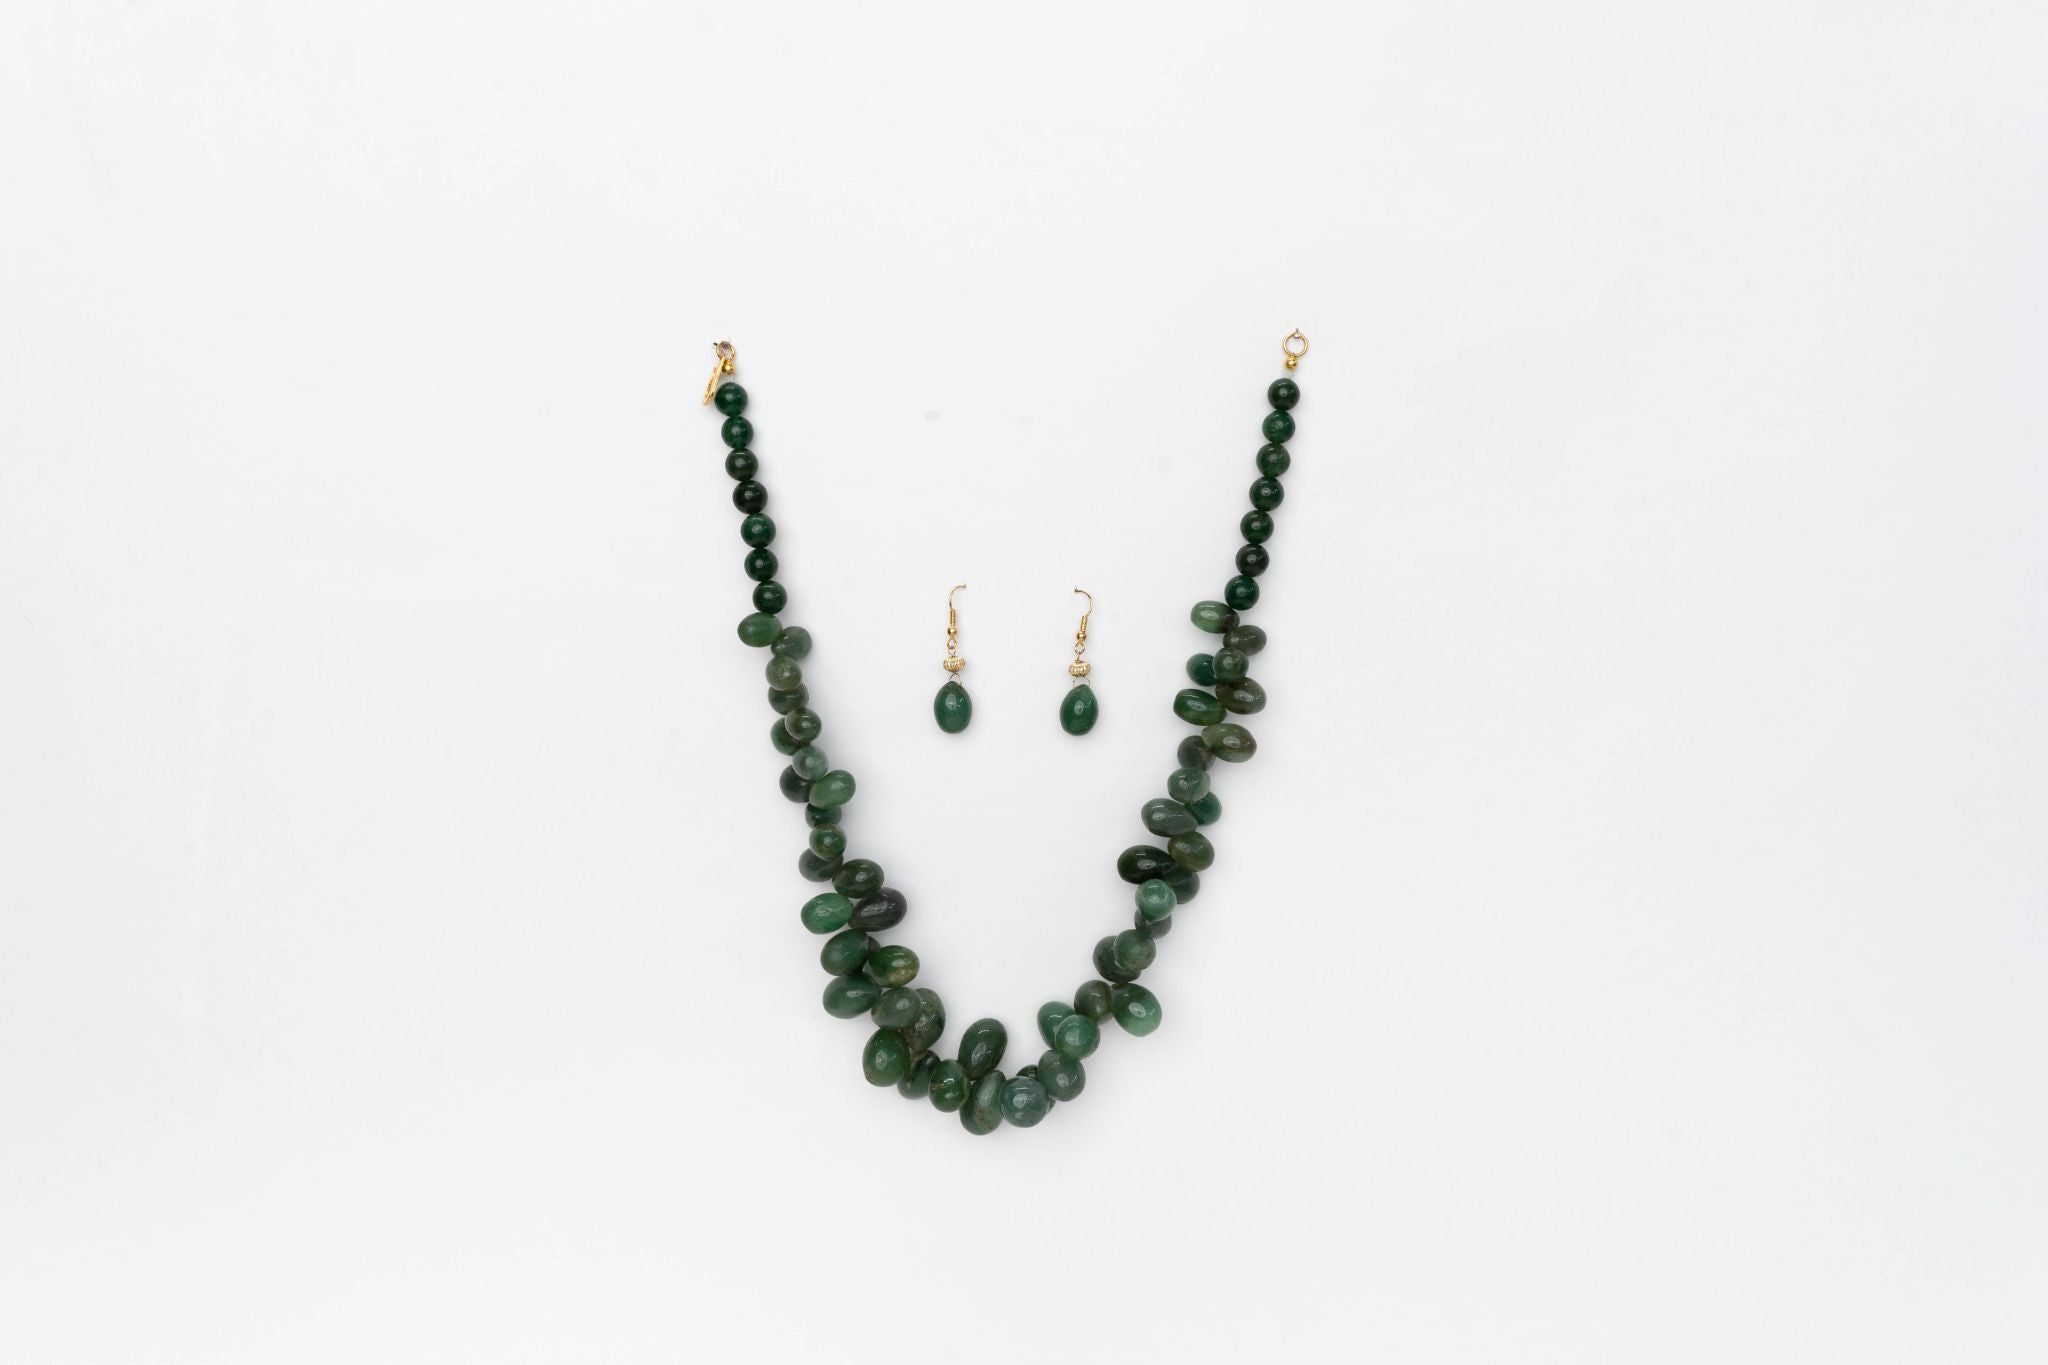 Green Aventurine Grapes Necklace - Bodh Gem and Crystals